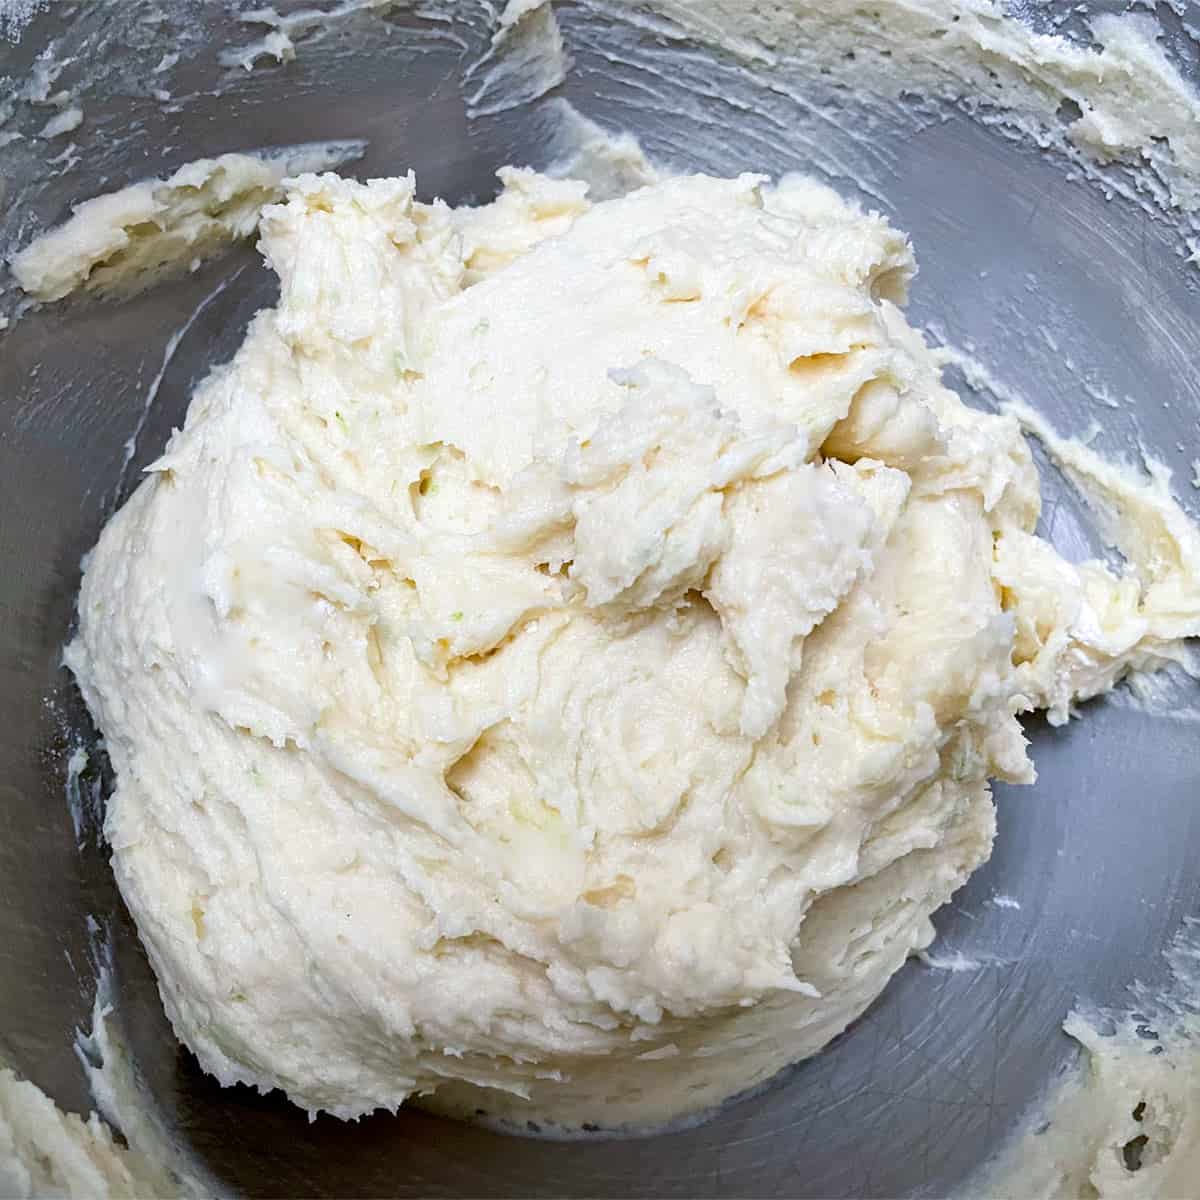 Key lime cookie batter getting ready to be chilled.